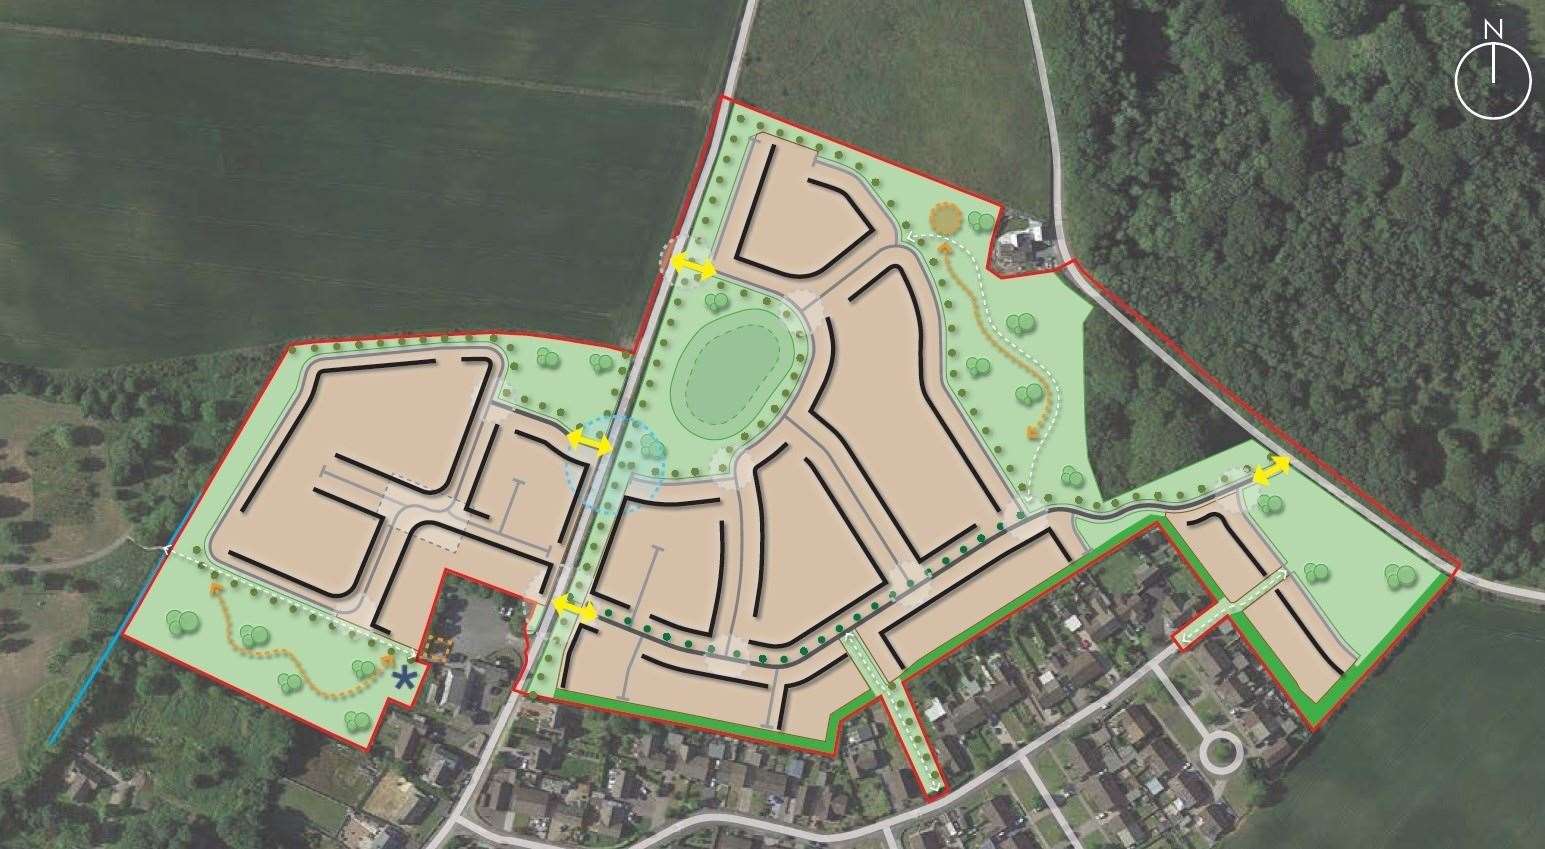 Images show the scale of the development planned at Potterton